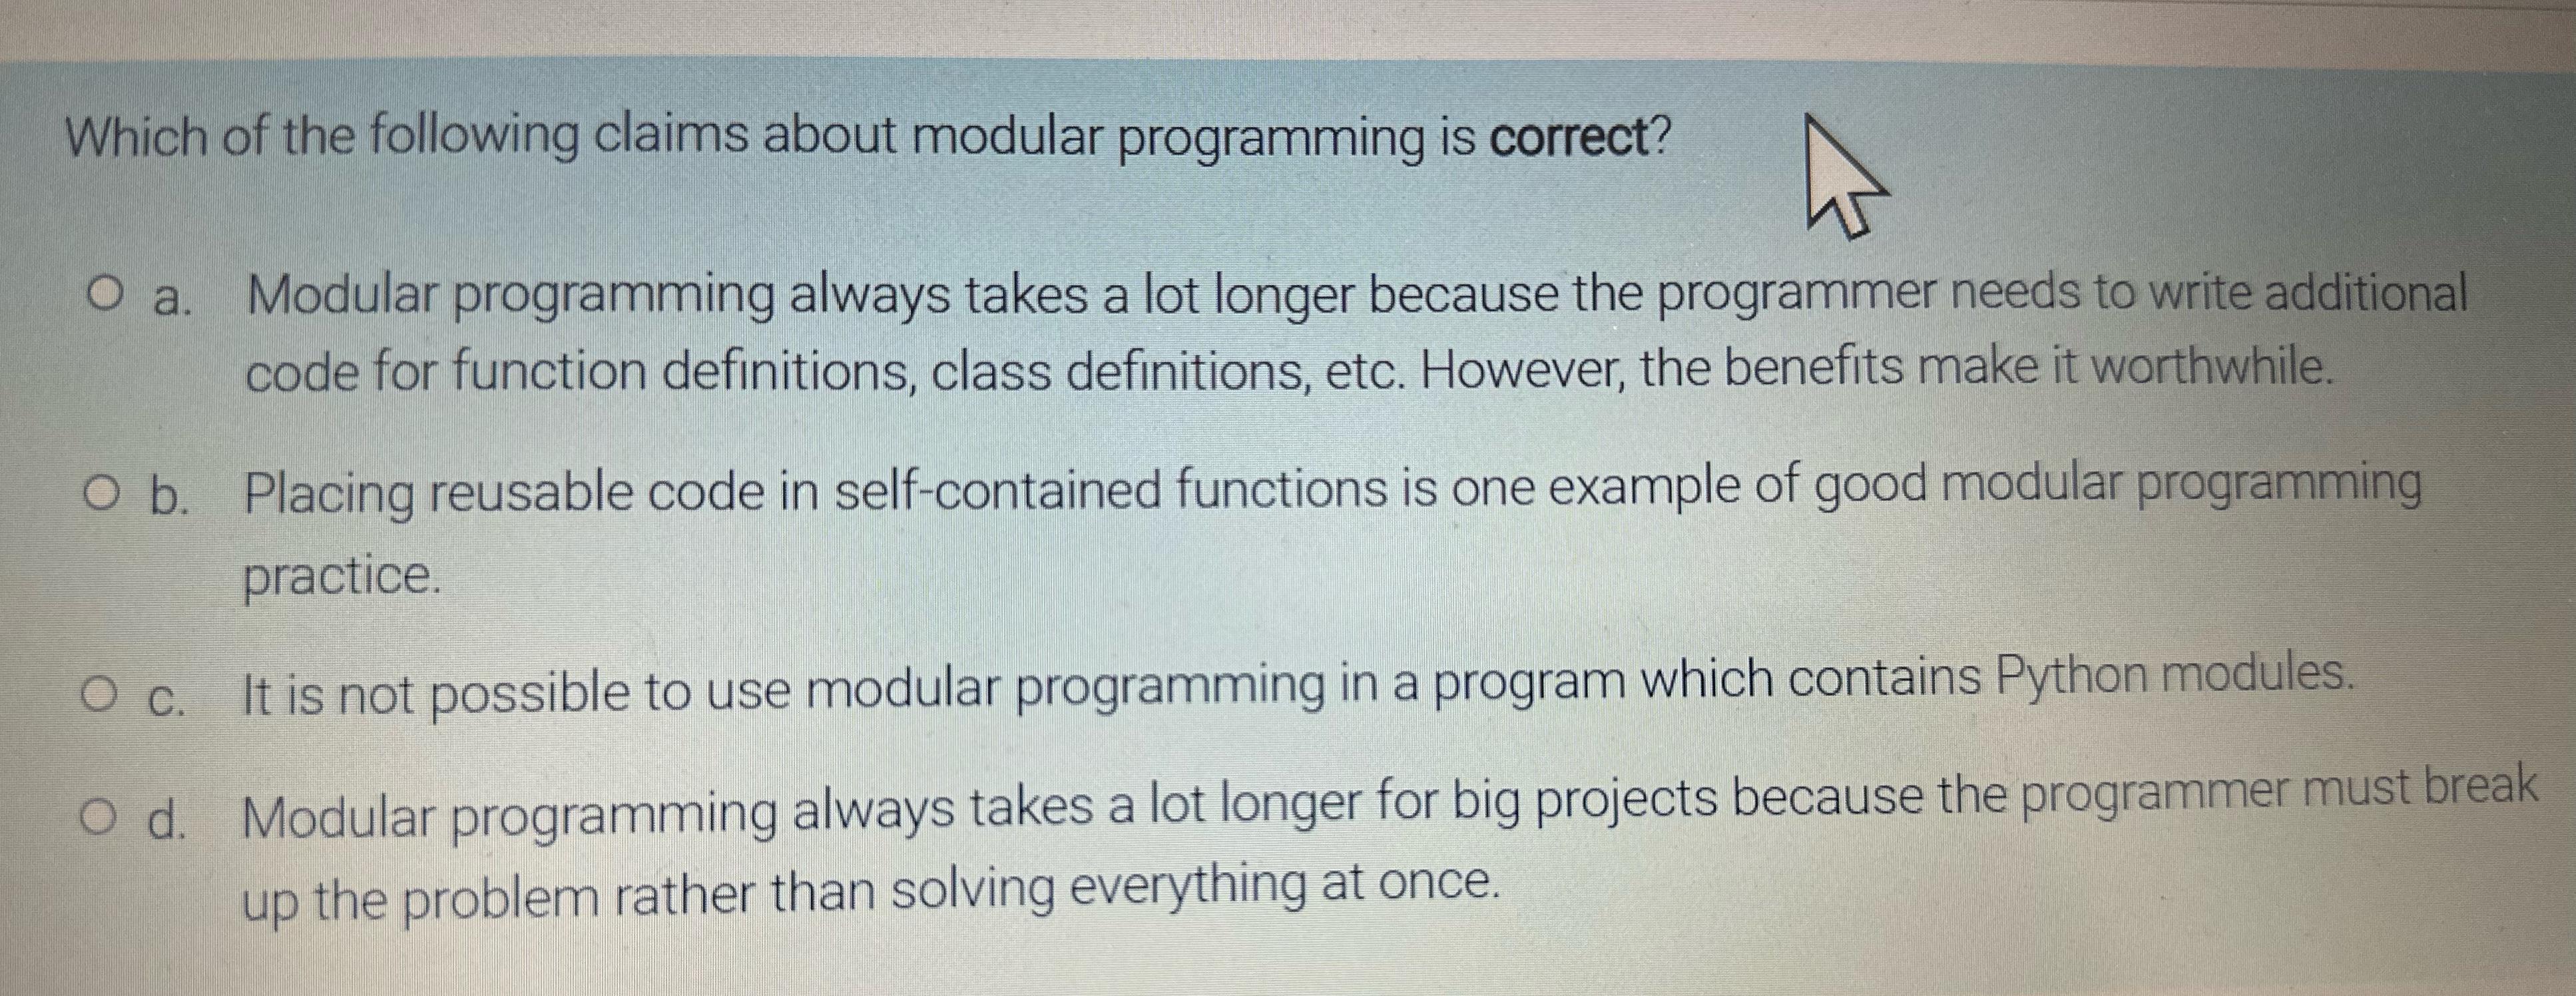 Which of the following claims about modular programming is correct? O a. Modular programming always takes a